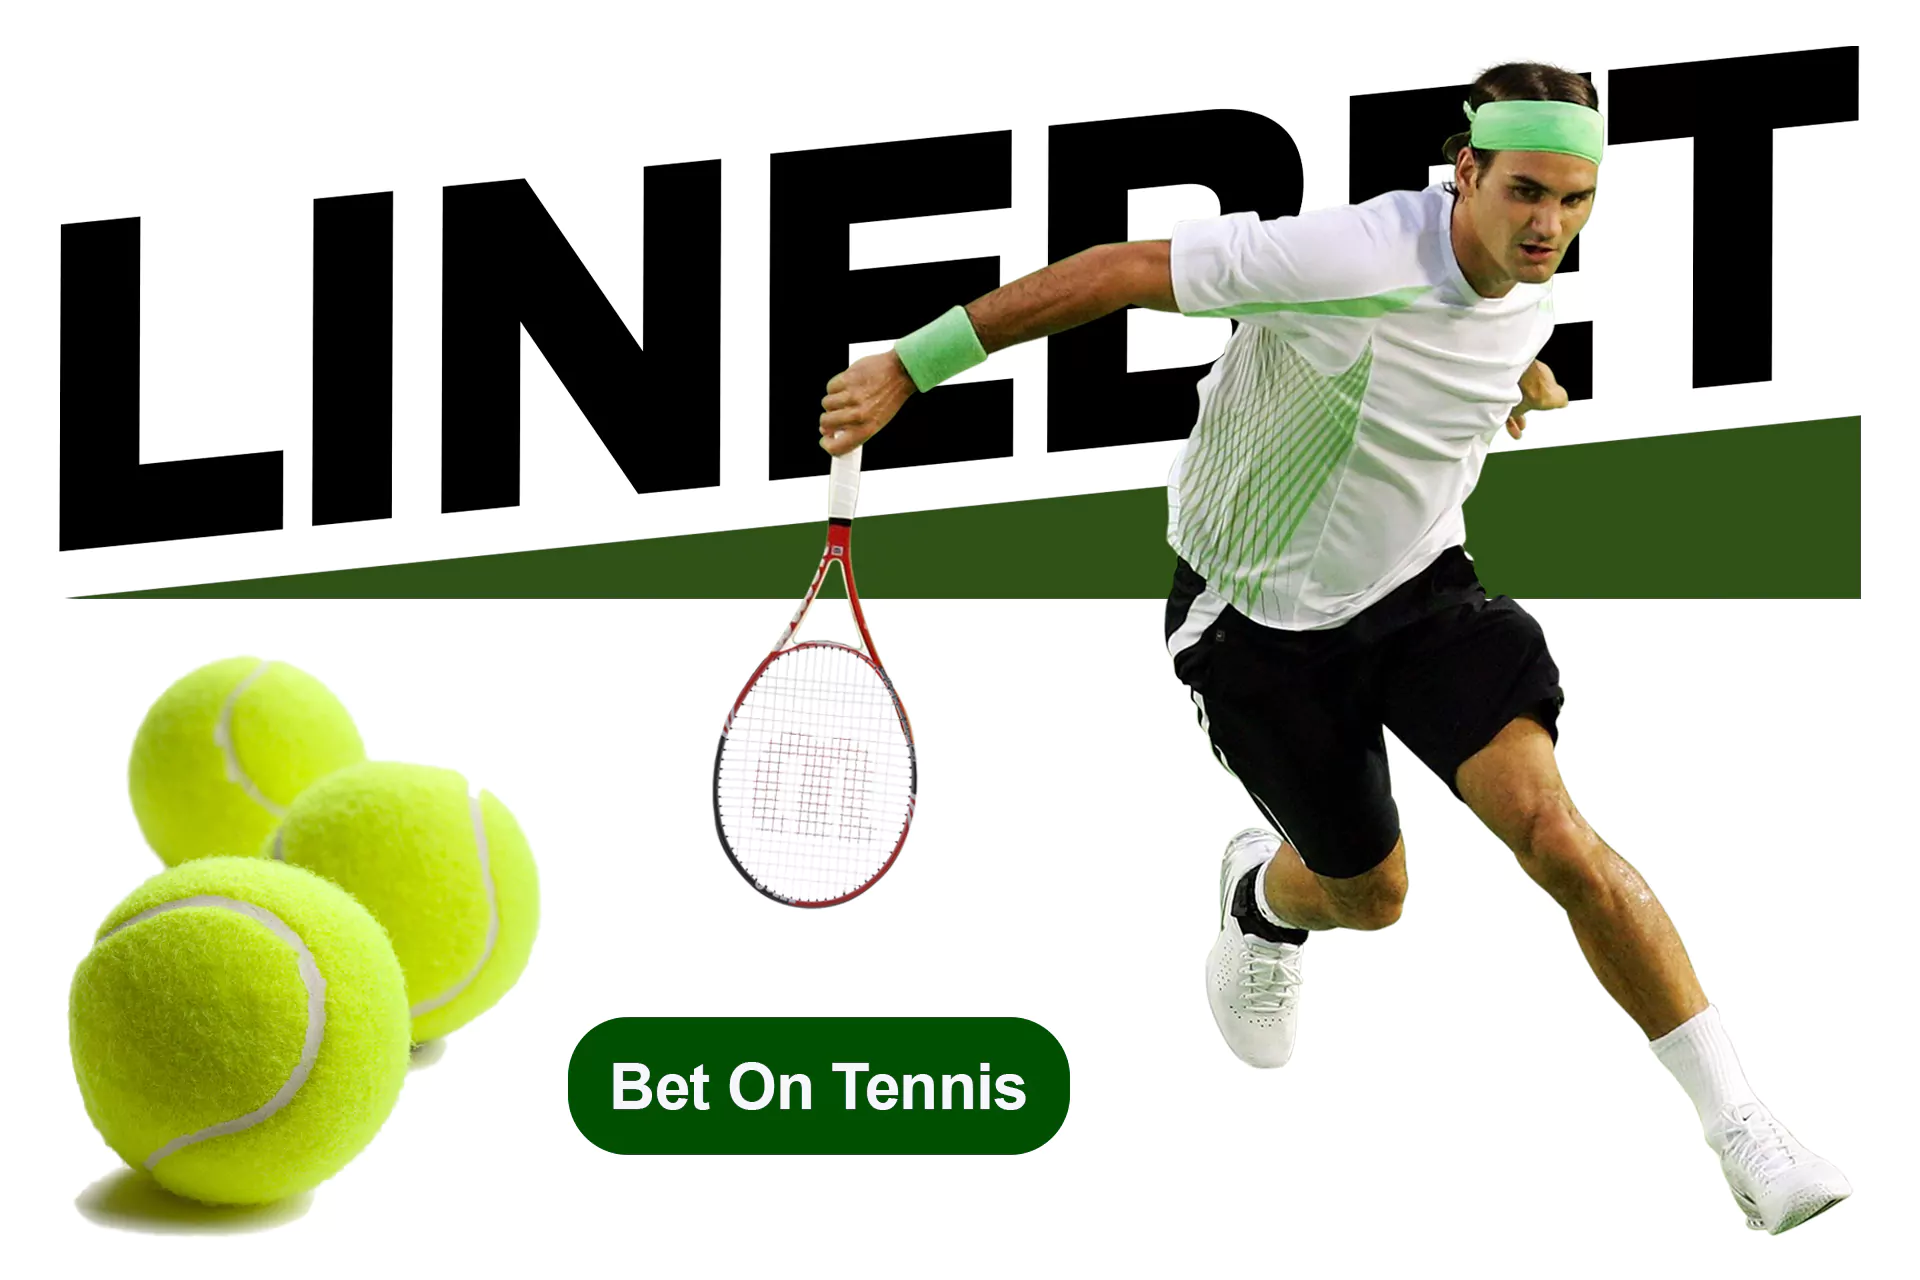 On Linebet, you can place bets on tennis as well.